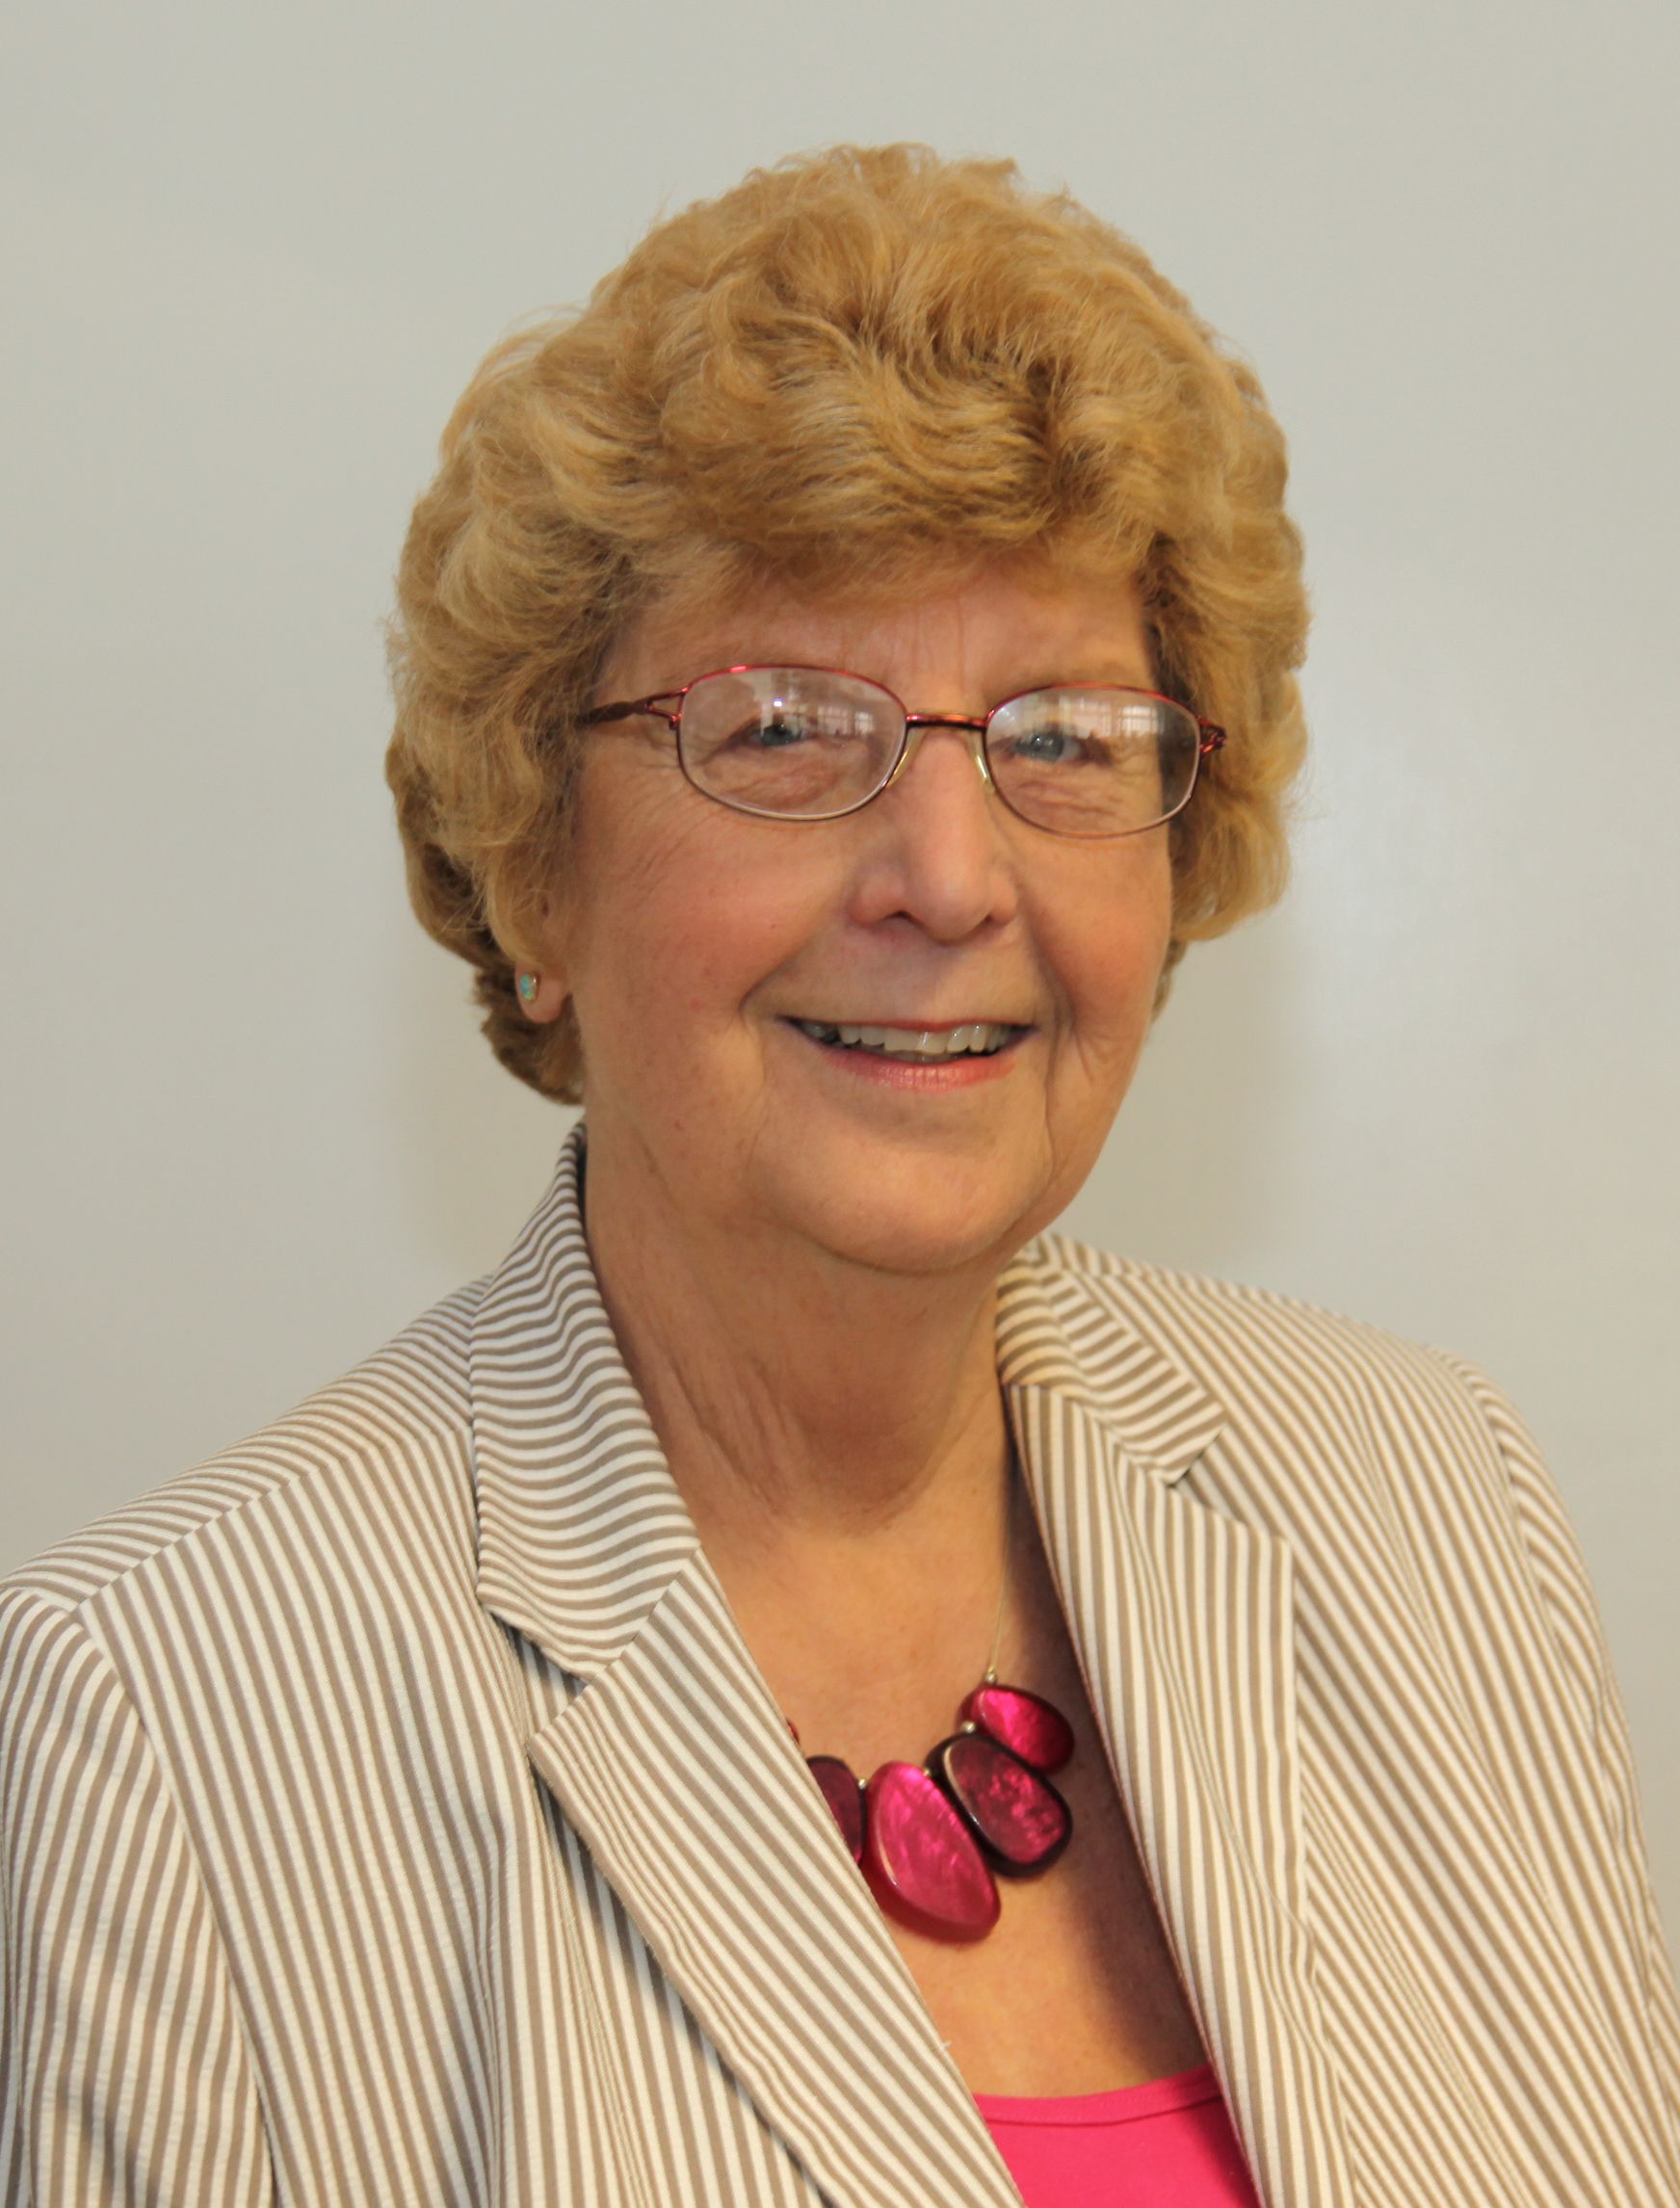 Profile image for Councillor Jeanette Richards